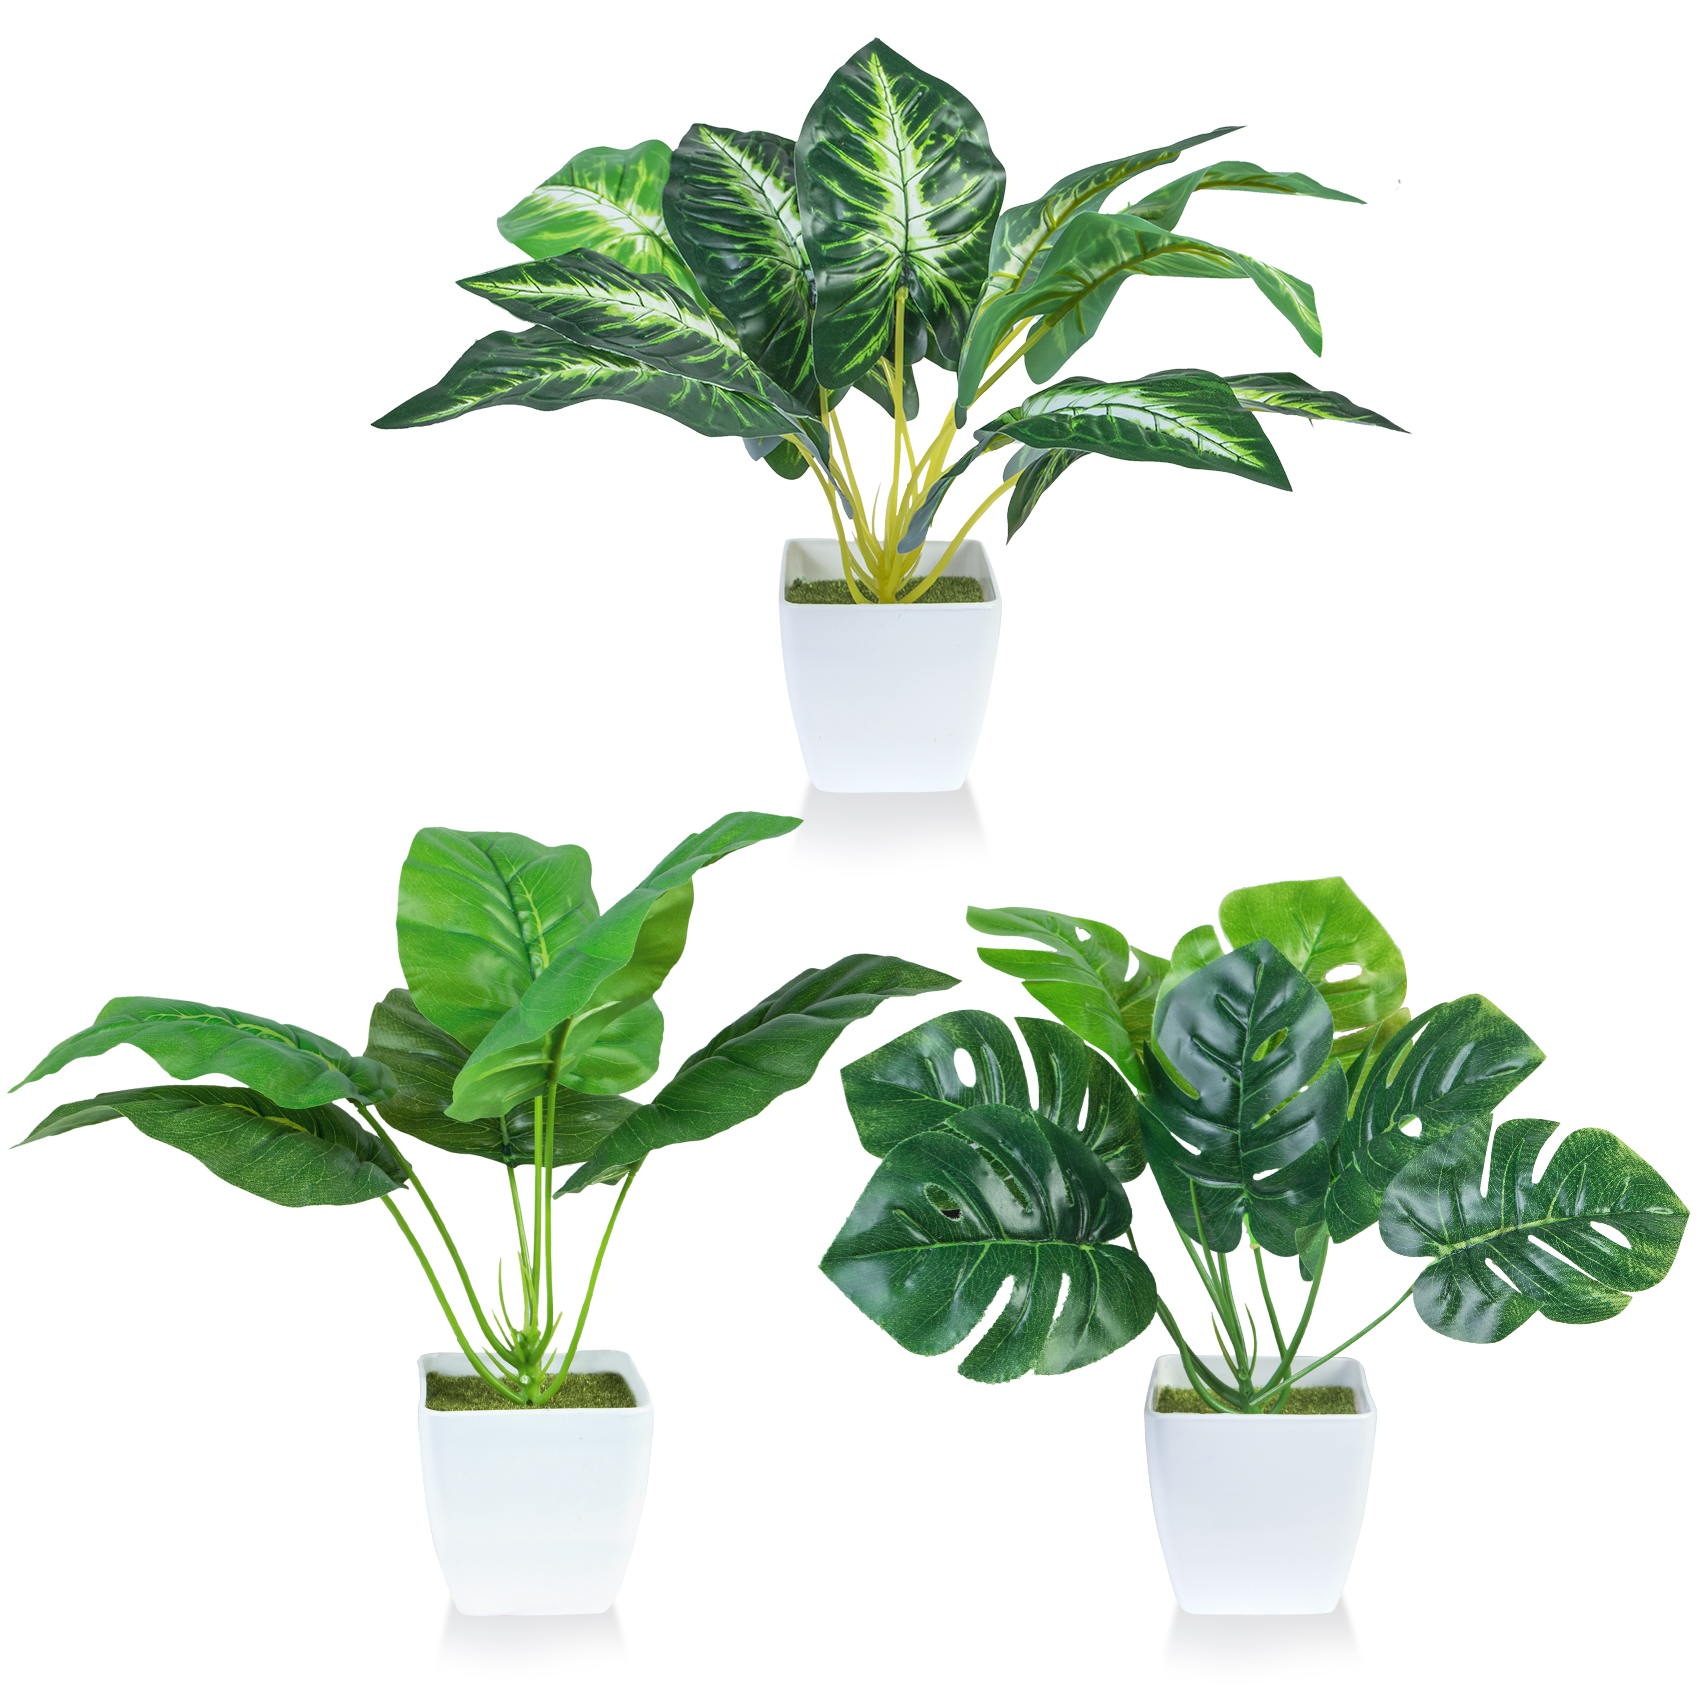 Ouddy Decor 3 Pack Small Fake Plants Artificial Mini Potted Plants Faux Greenery Tabletop Artificial Plants for Desk Shelf Bathroom Office Home Indoor Decor